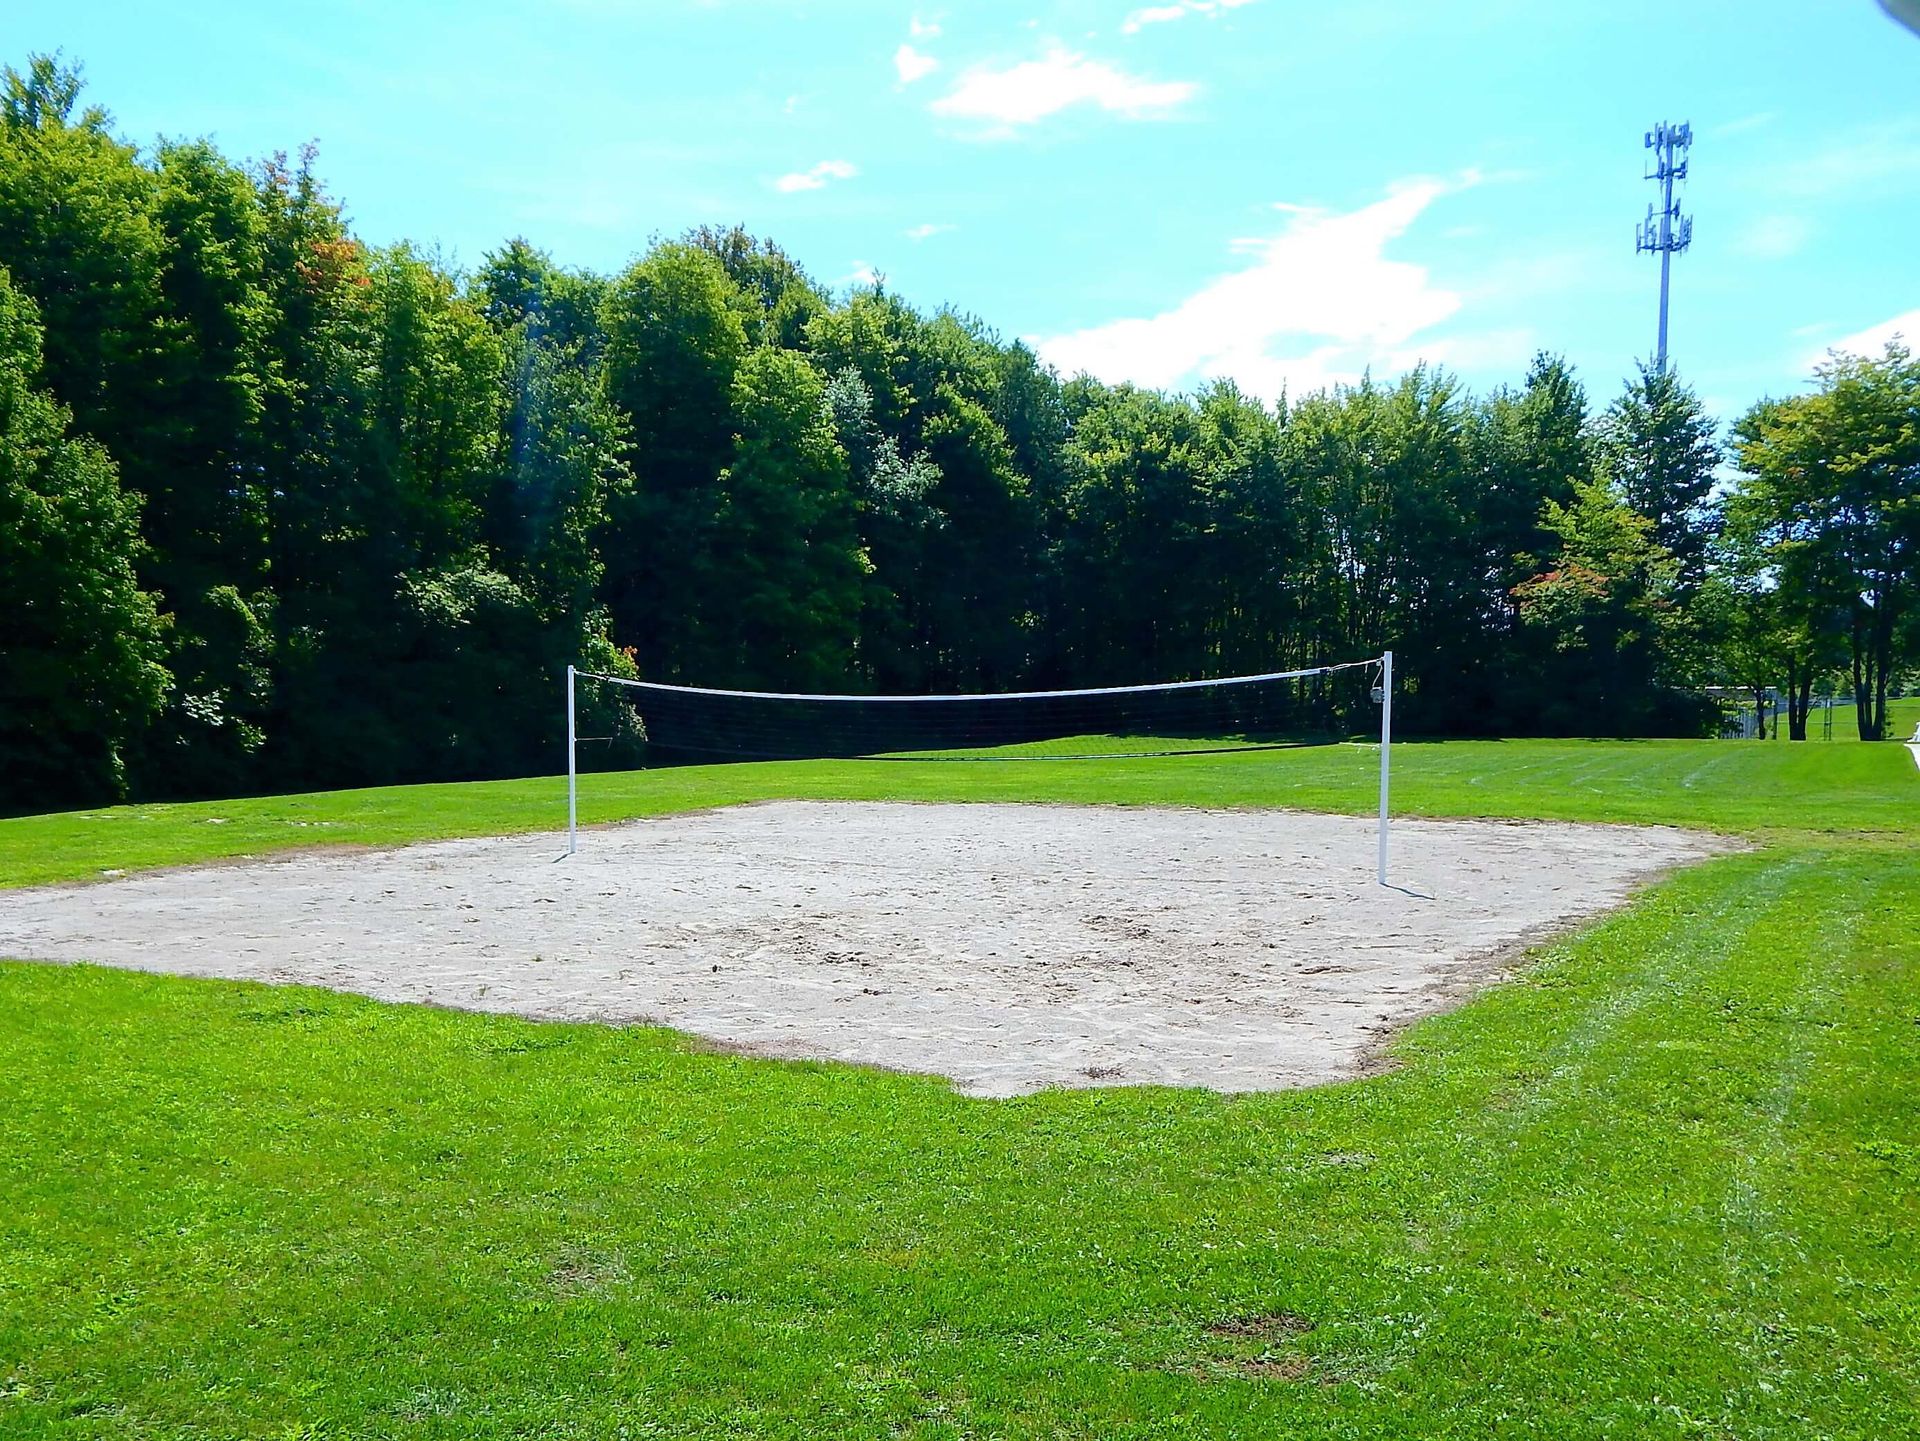 A sand volleyball court in a park with trees in the background.